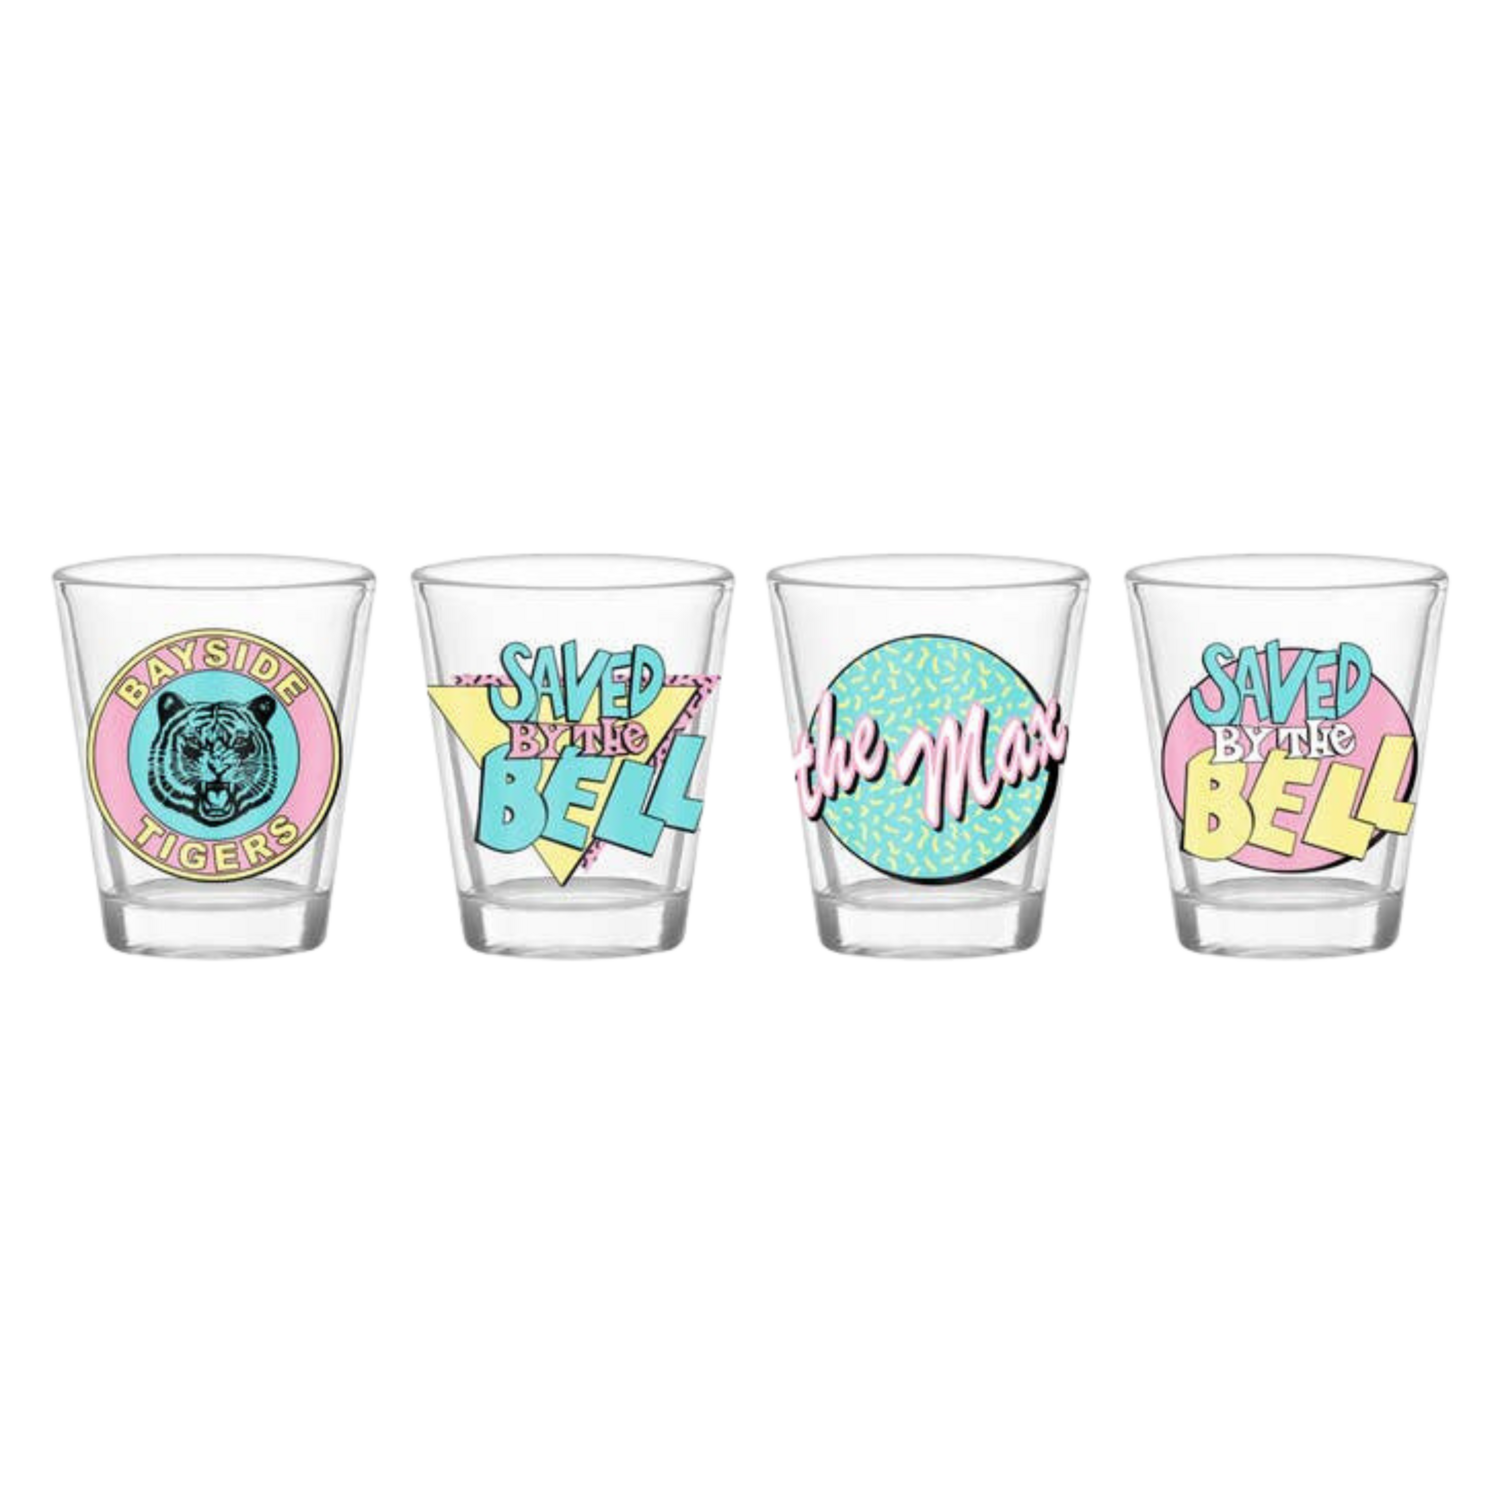 SAVED BY THE BELL SHOT GLASS SET